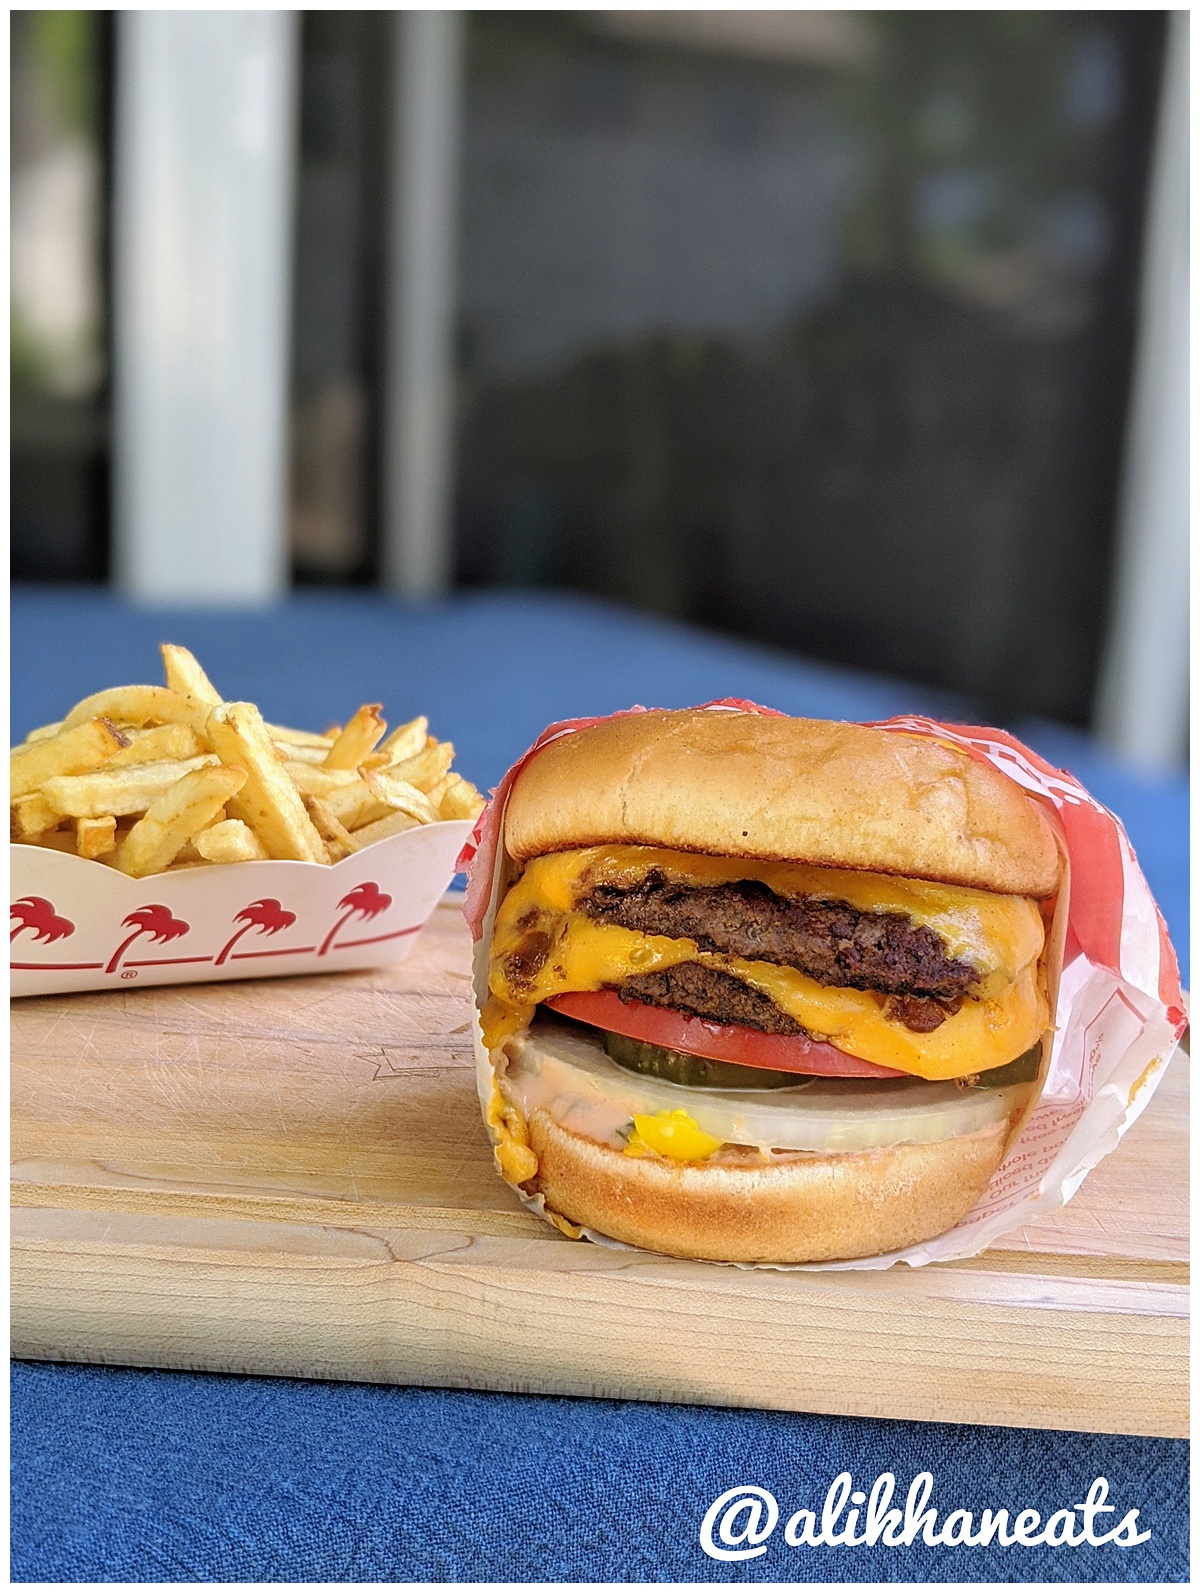 In-N-Out double double with Ali toppings